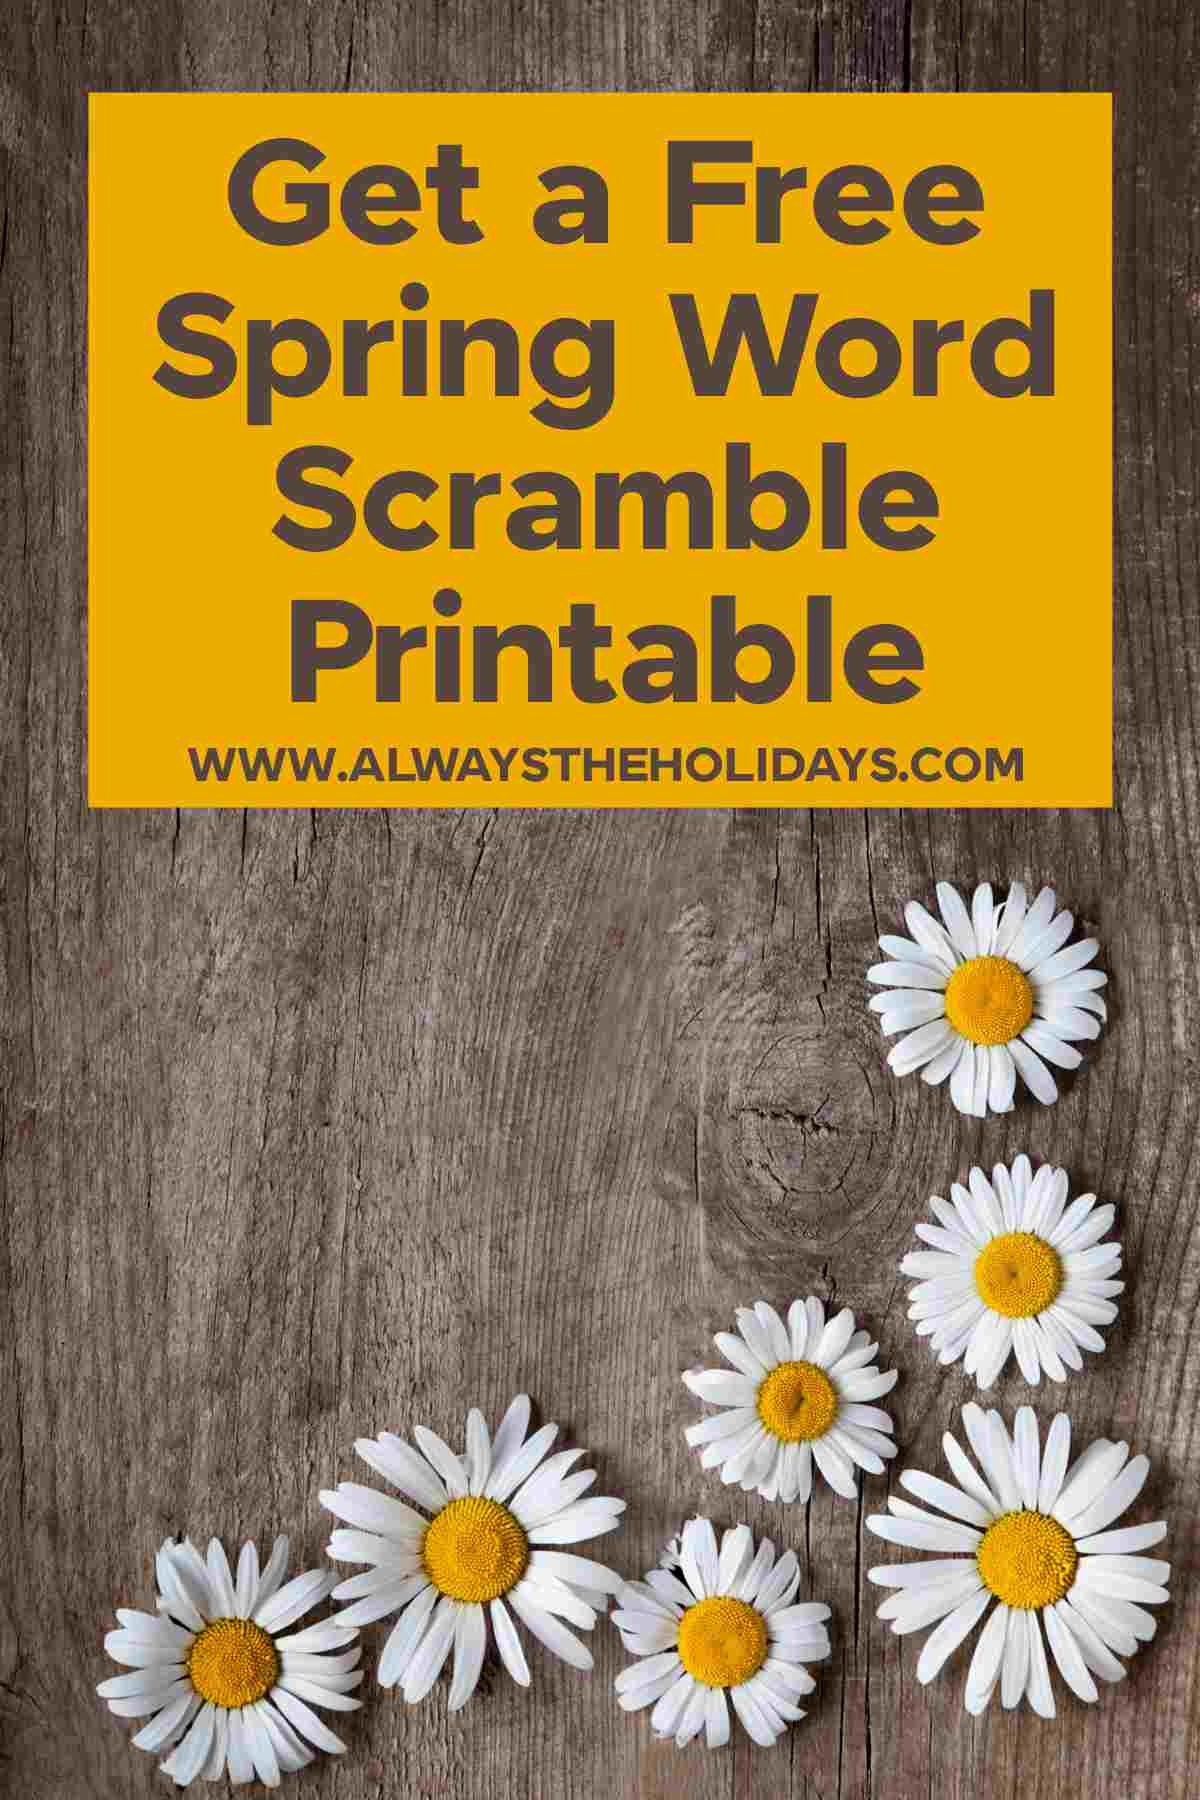 A wooden background with daisies lining the bottom and the right side with a yellow box at the top and text in it that reads "spring word scramble printable".